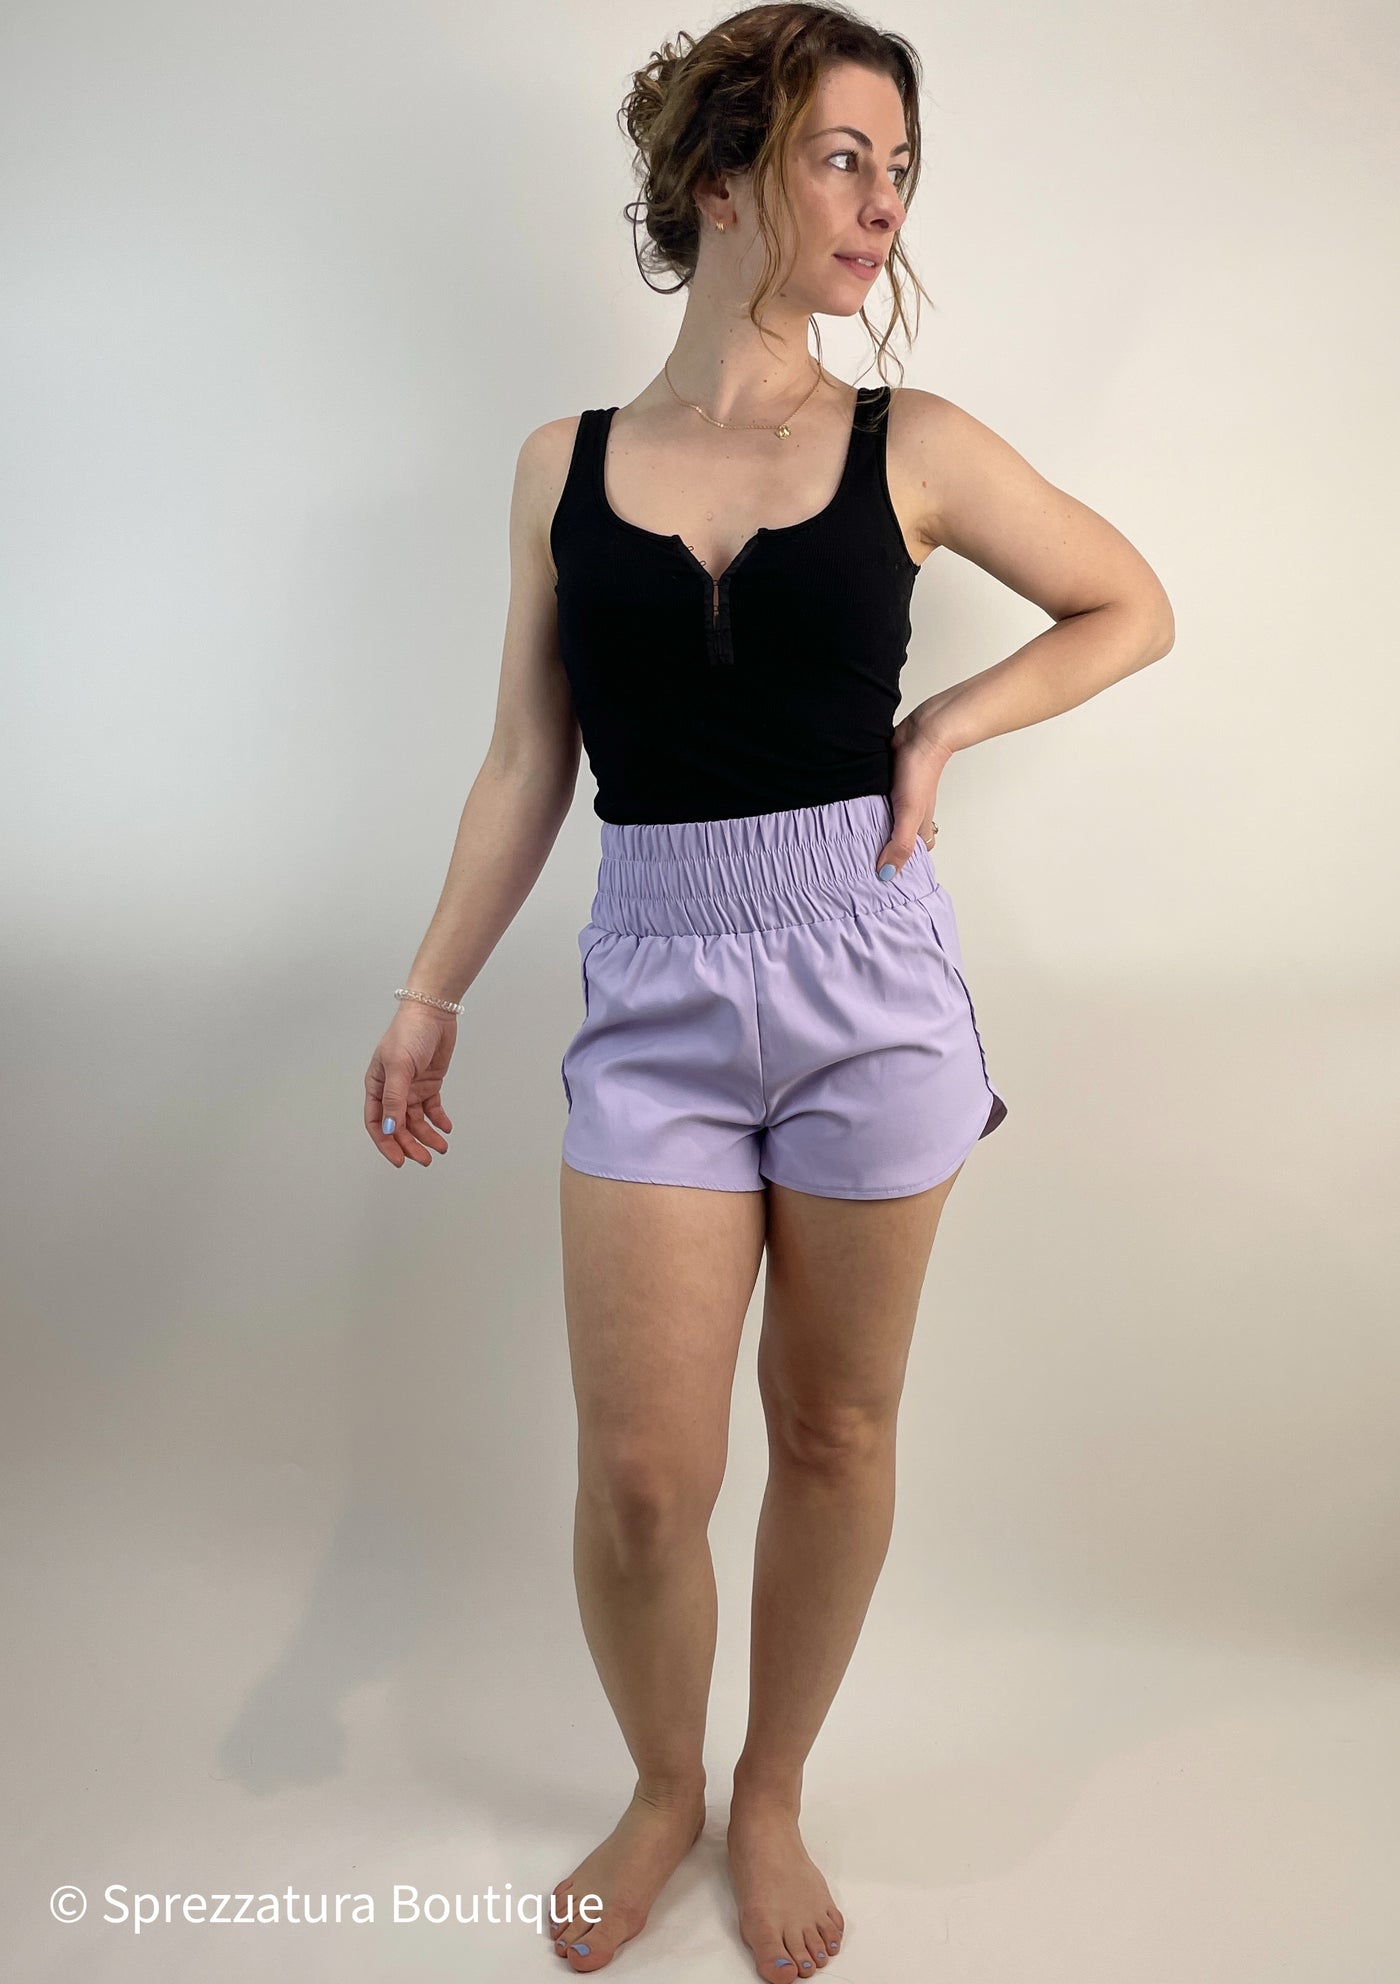 Lilac track shorts. Lightweight super high rise women's shorts for exercise or athleisure casual shorts. Elastic waistband comfortable shorts in lavender. Pastel purple shorts Casual women's clothing outfit summer style feminine